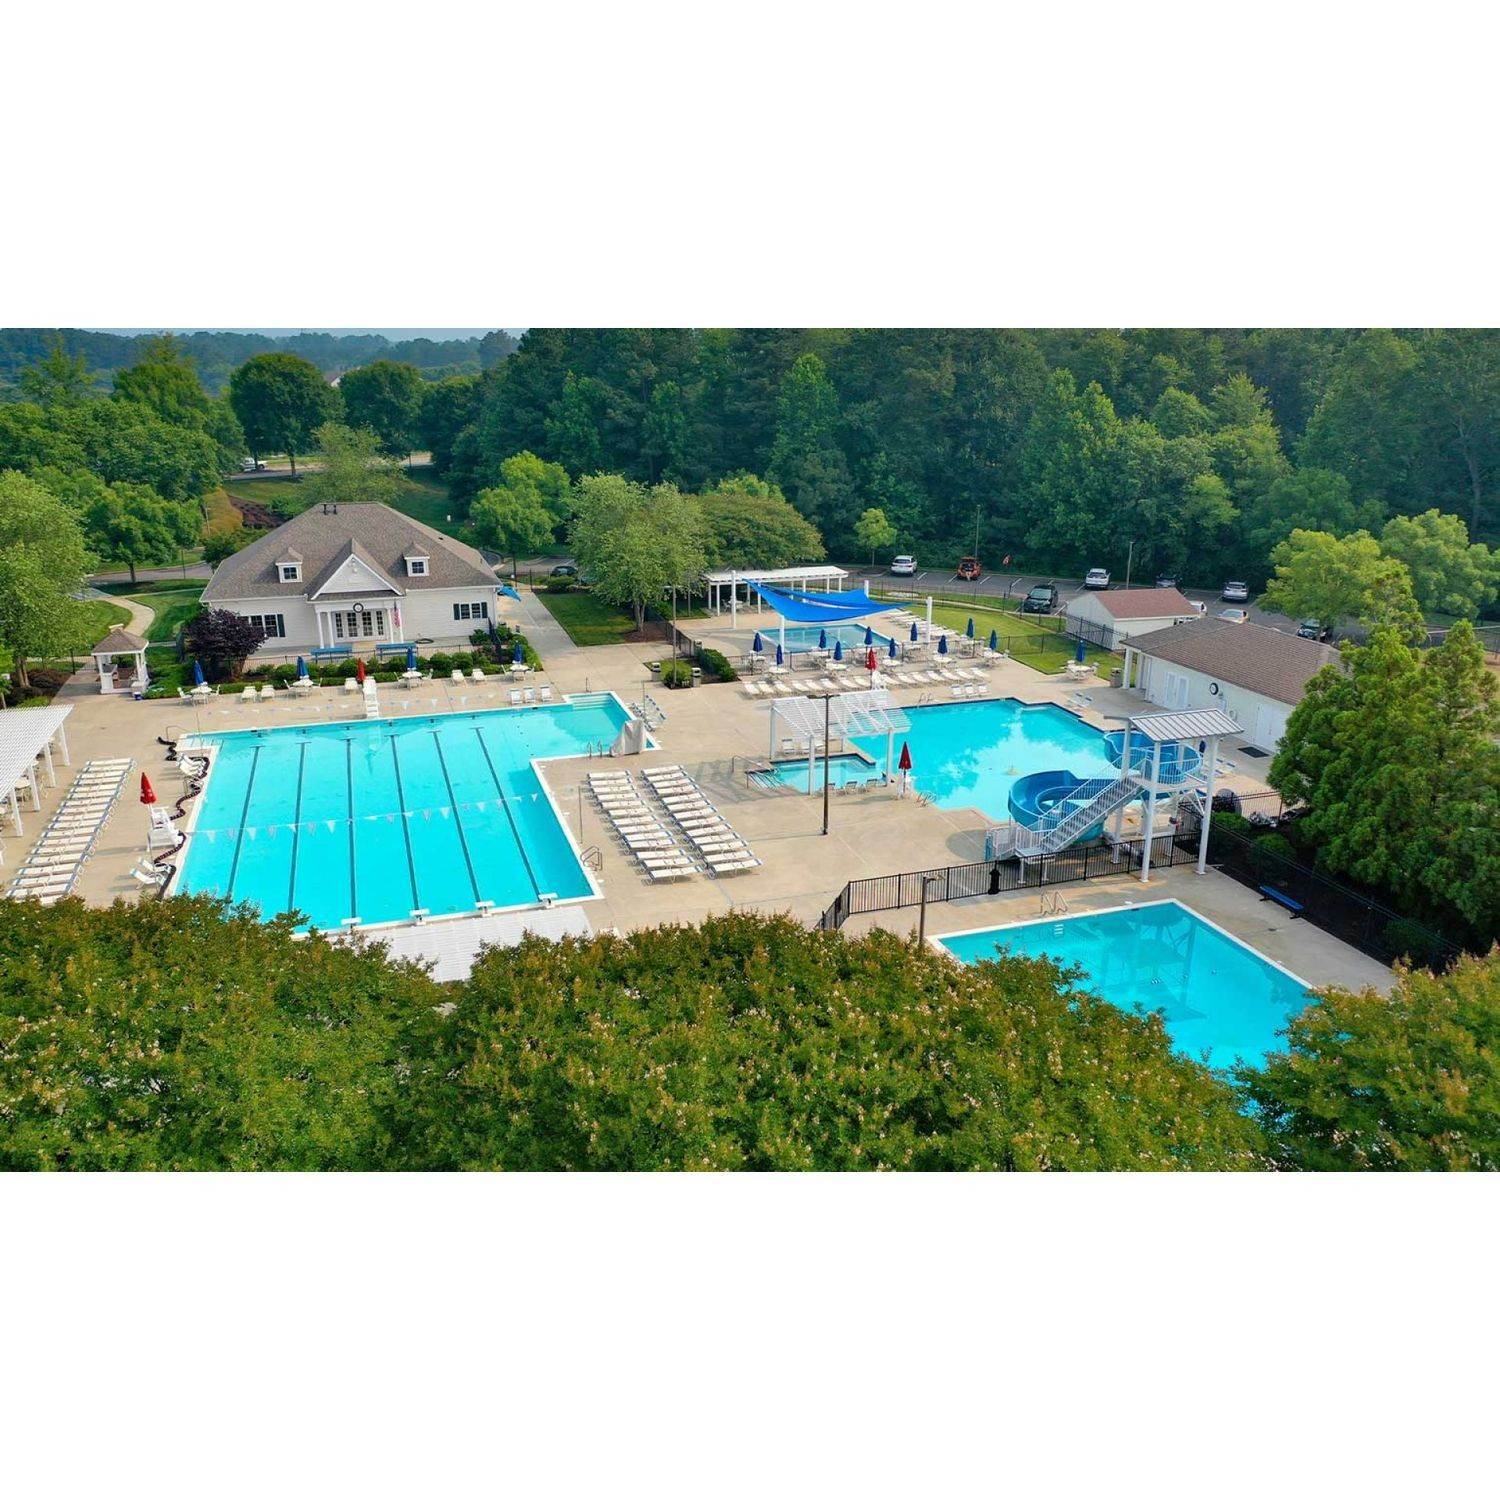 3. The Pointe at Twin Hickory prédio em 4605 Pouncey Tract Road, Glen Allen, VA 23059